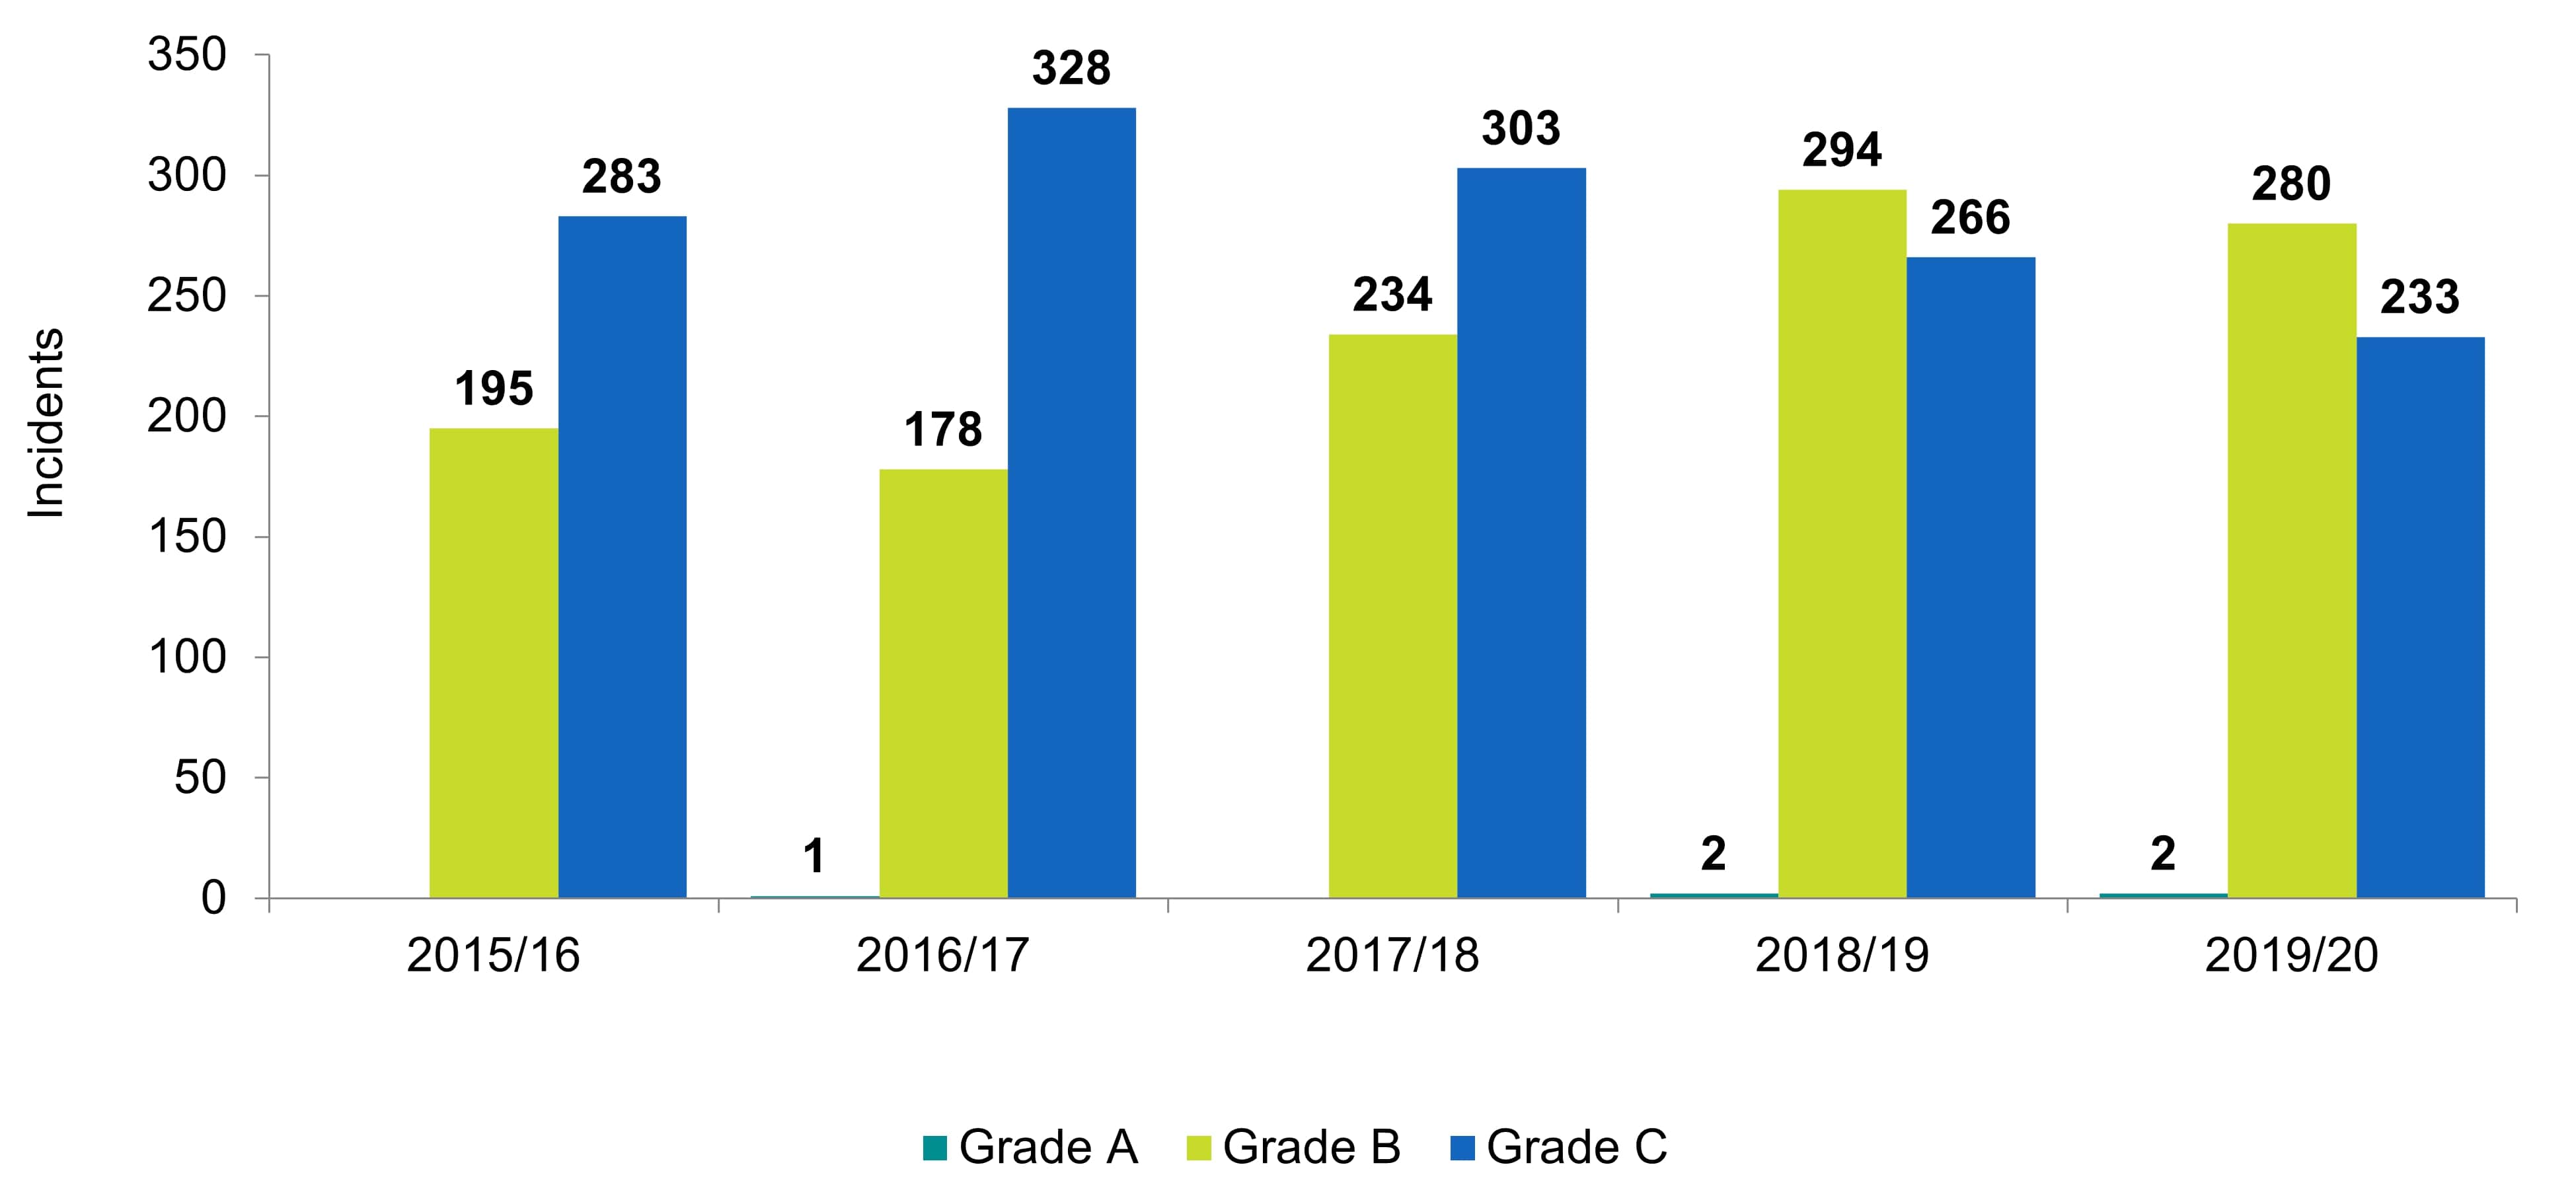 [1. Label] Number of incidents by grade, 2015/16 – 2019/20. [2. Construction] This bar chart shows the total number of incidents by grade (A, B, C or Near Miss), with A being the most serious, from 2015/16 to 2019/20. [3. Summary] The chart shows that in 2019/20, 562 incidents (including near misses) were reported to the HFEA. Grade B incidents remain the most common but have decreased since last year [4. Data] The figures are 2015/16, 0 A’s, 195 B’s, 283 C’s and 36 Near Misses, a total of 514 incidents; 2016/17, 1 A, 178 B’s, 328 C’s and 45 Near Misses, a total of 552 incidents; 2017/18, 0 A’s, 234 B’s, 303 C’s and 34 Near Misses, a total of 571 incidents; 2018/19, 2 A’s, 294 B’s, 266 C’s and 44 Near Misses, a total of 606 incidents; 2019/20, 2 A’s, 280 B’s, 233 C’s and 47 Near Misses, a total of 562 incidents.